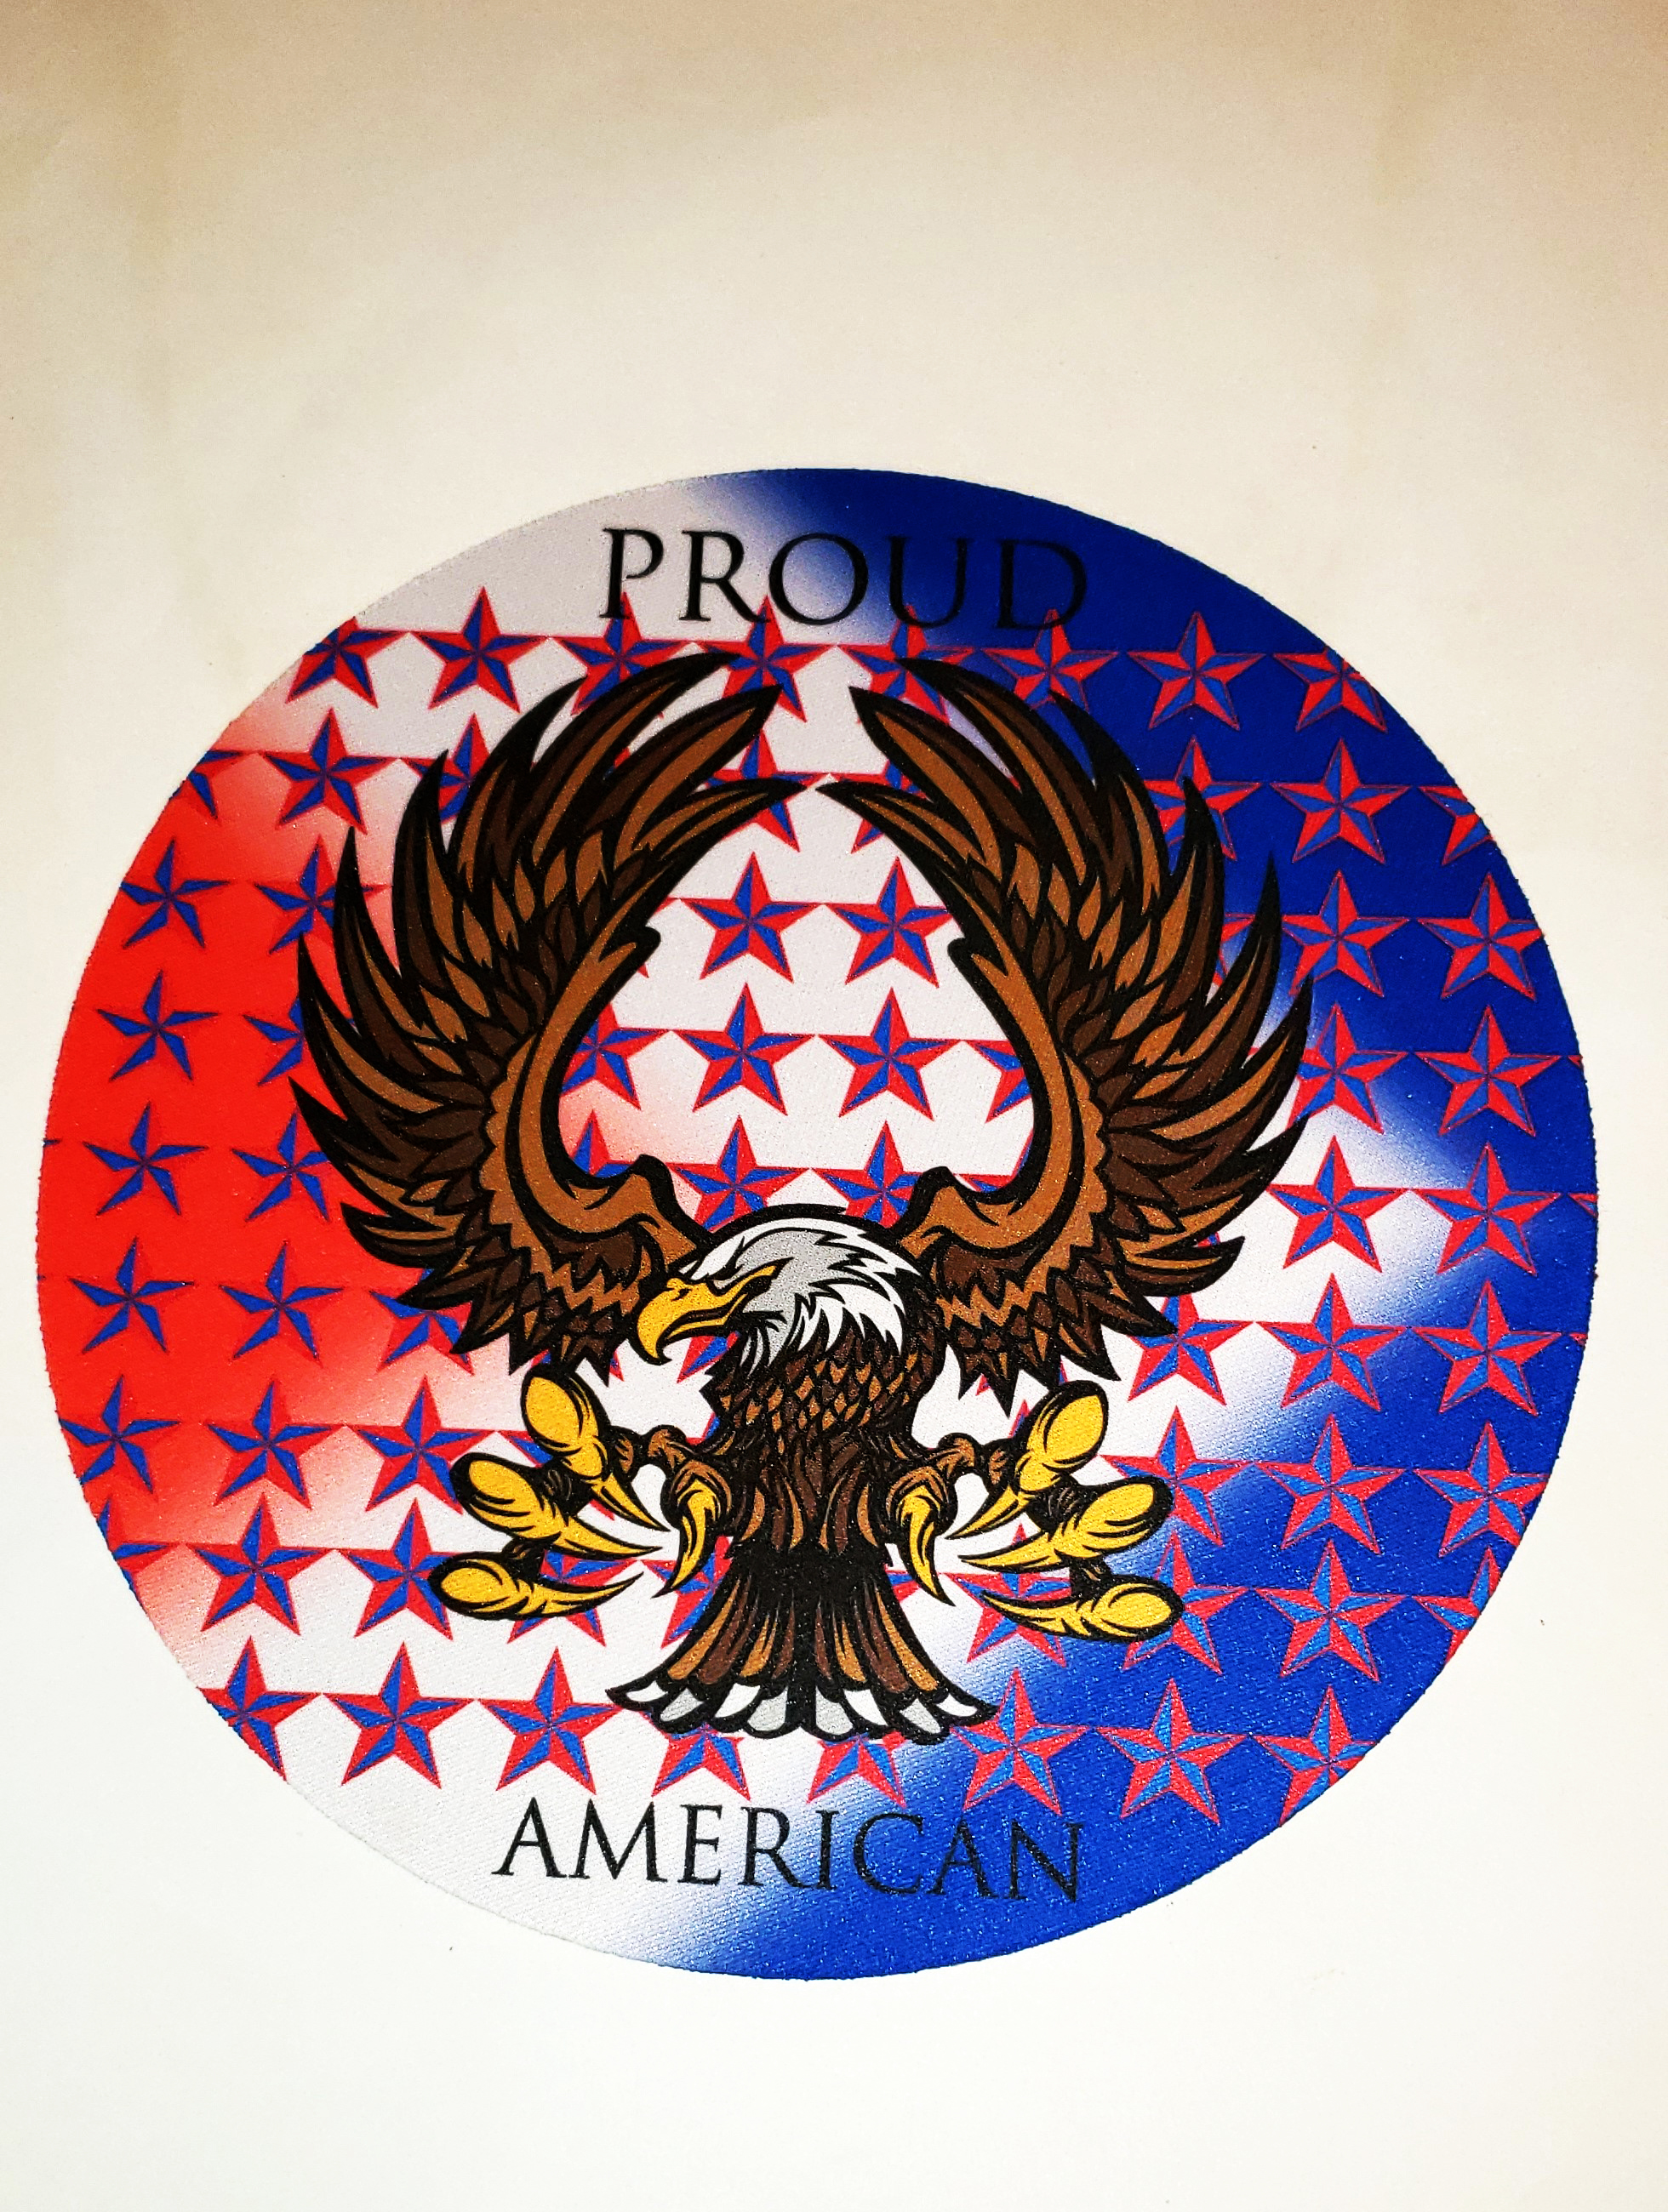 PROUD AMERICAN made with sublimation printing